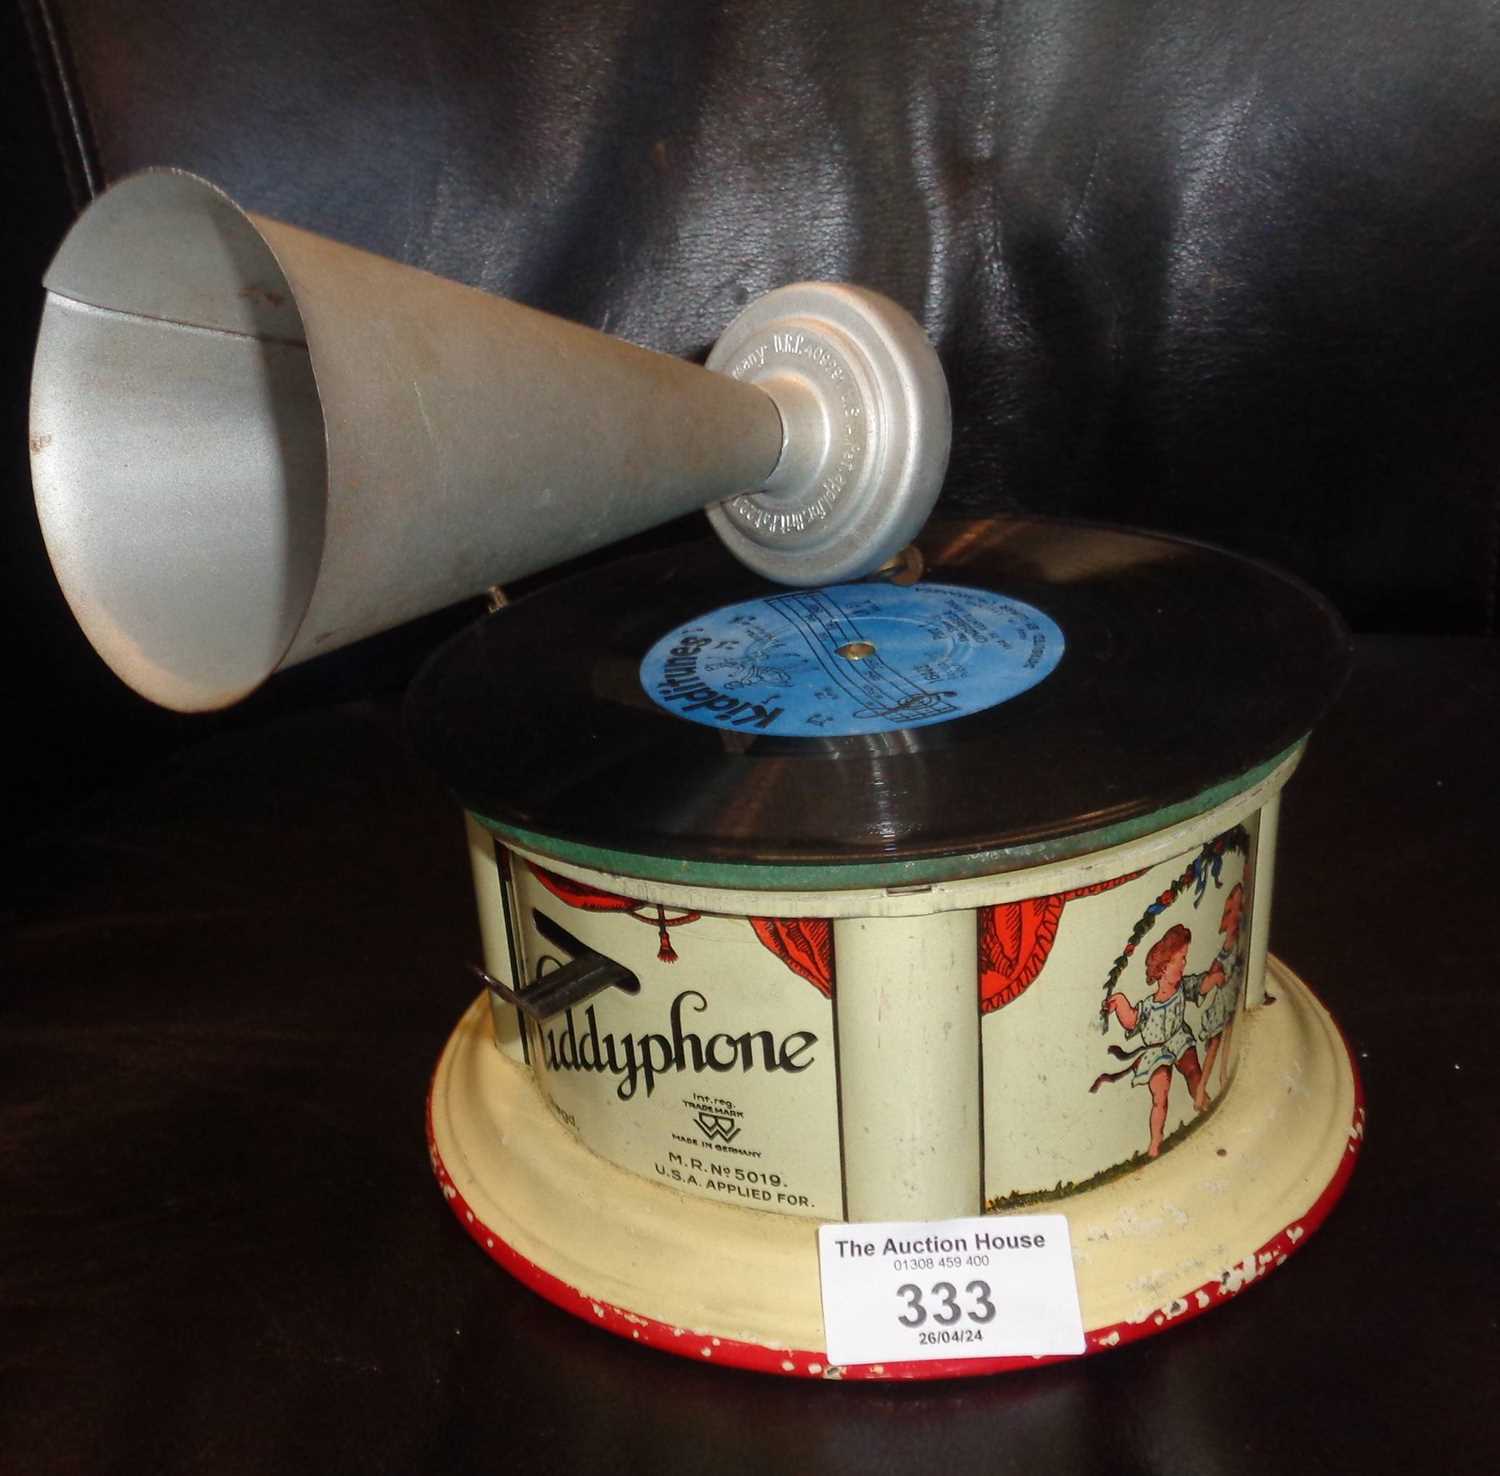 Rare 1920's tinplate clockwork 'Kiddyphone' record turntable, made in Germany, GWO with Kidditunes - Image 2 of 2